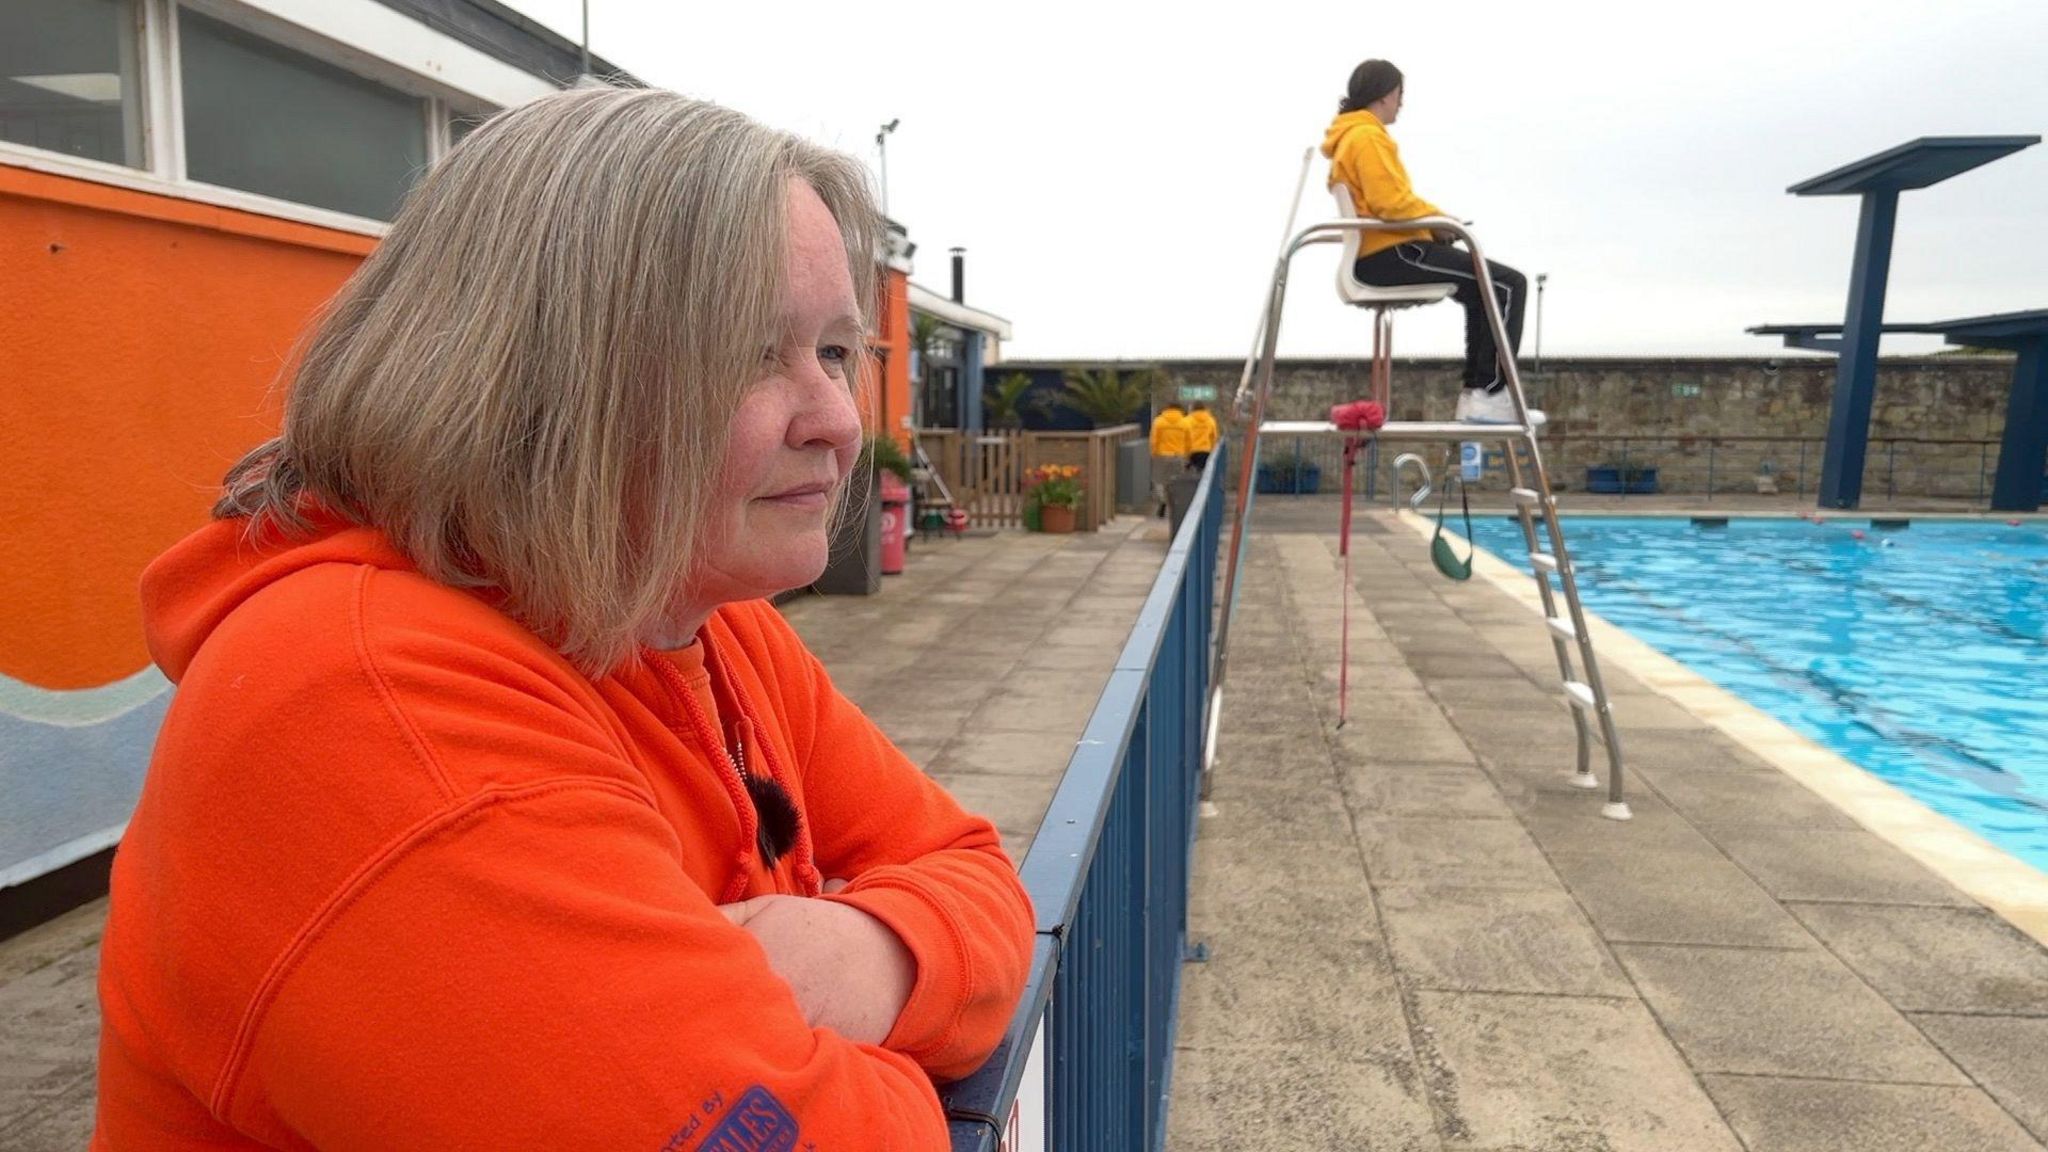 Emma Pusill looks at a swimming pool to her right. She is leaning on a blue railing